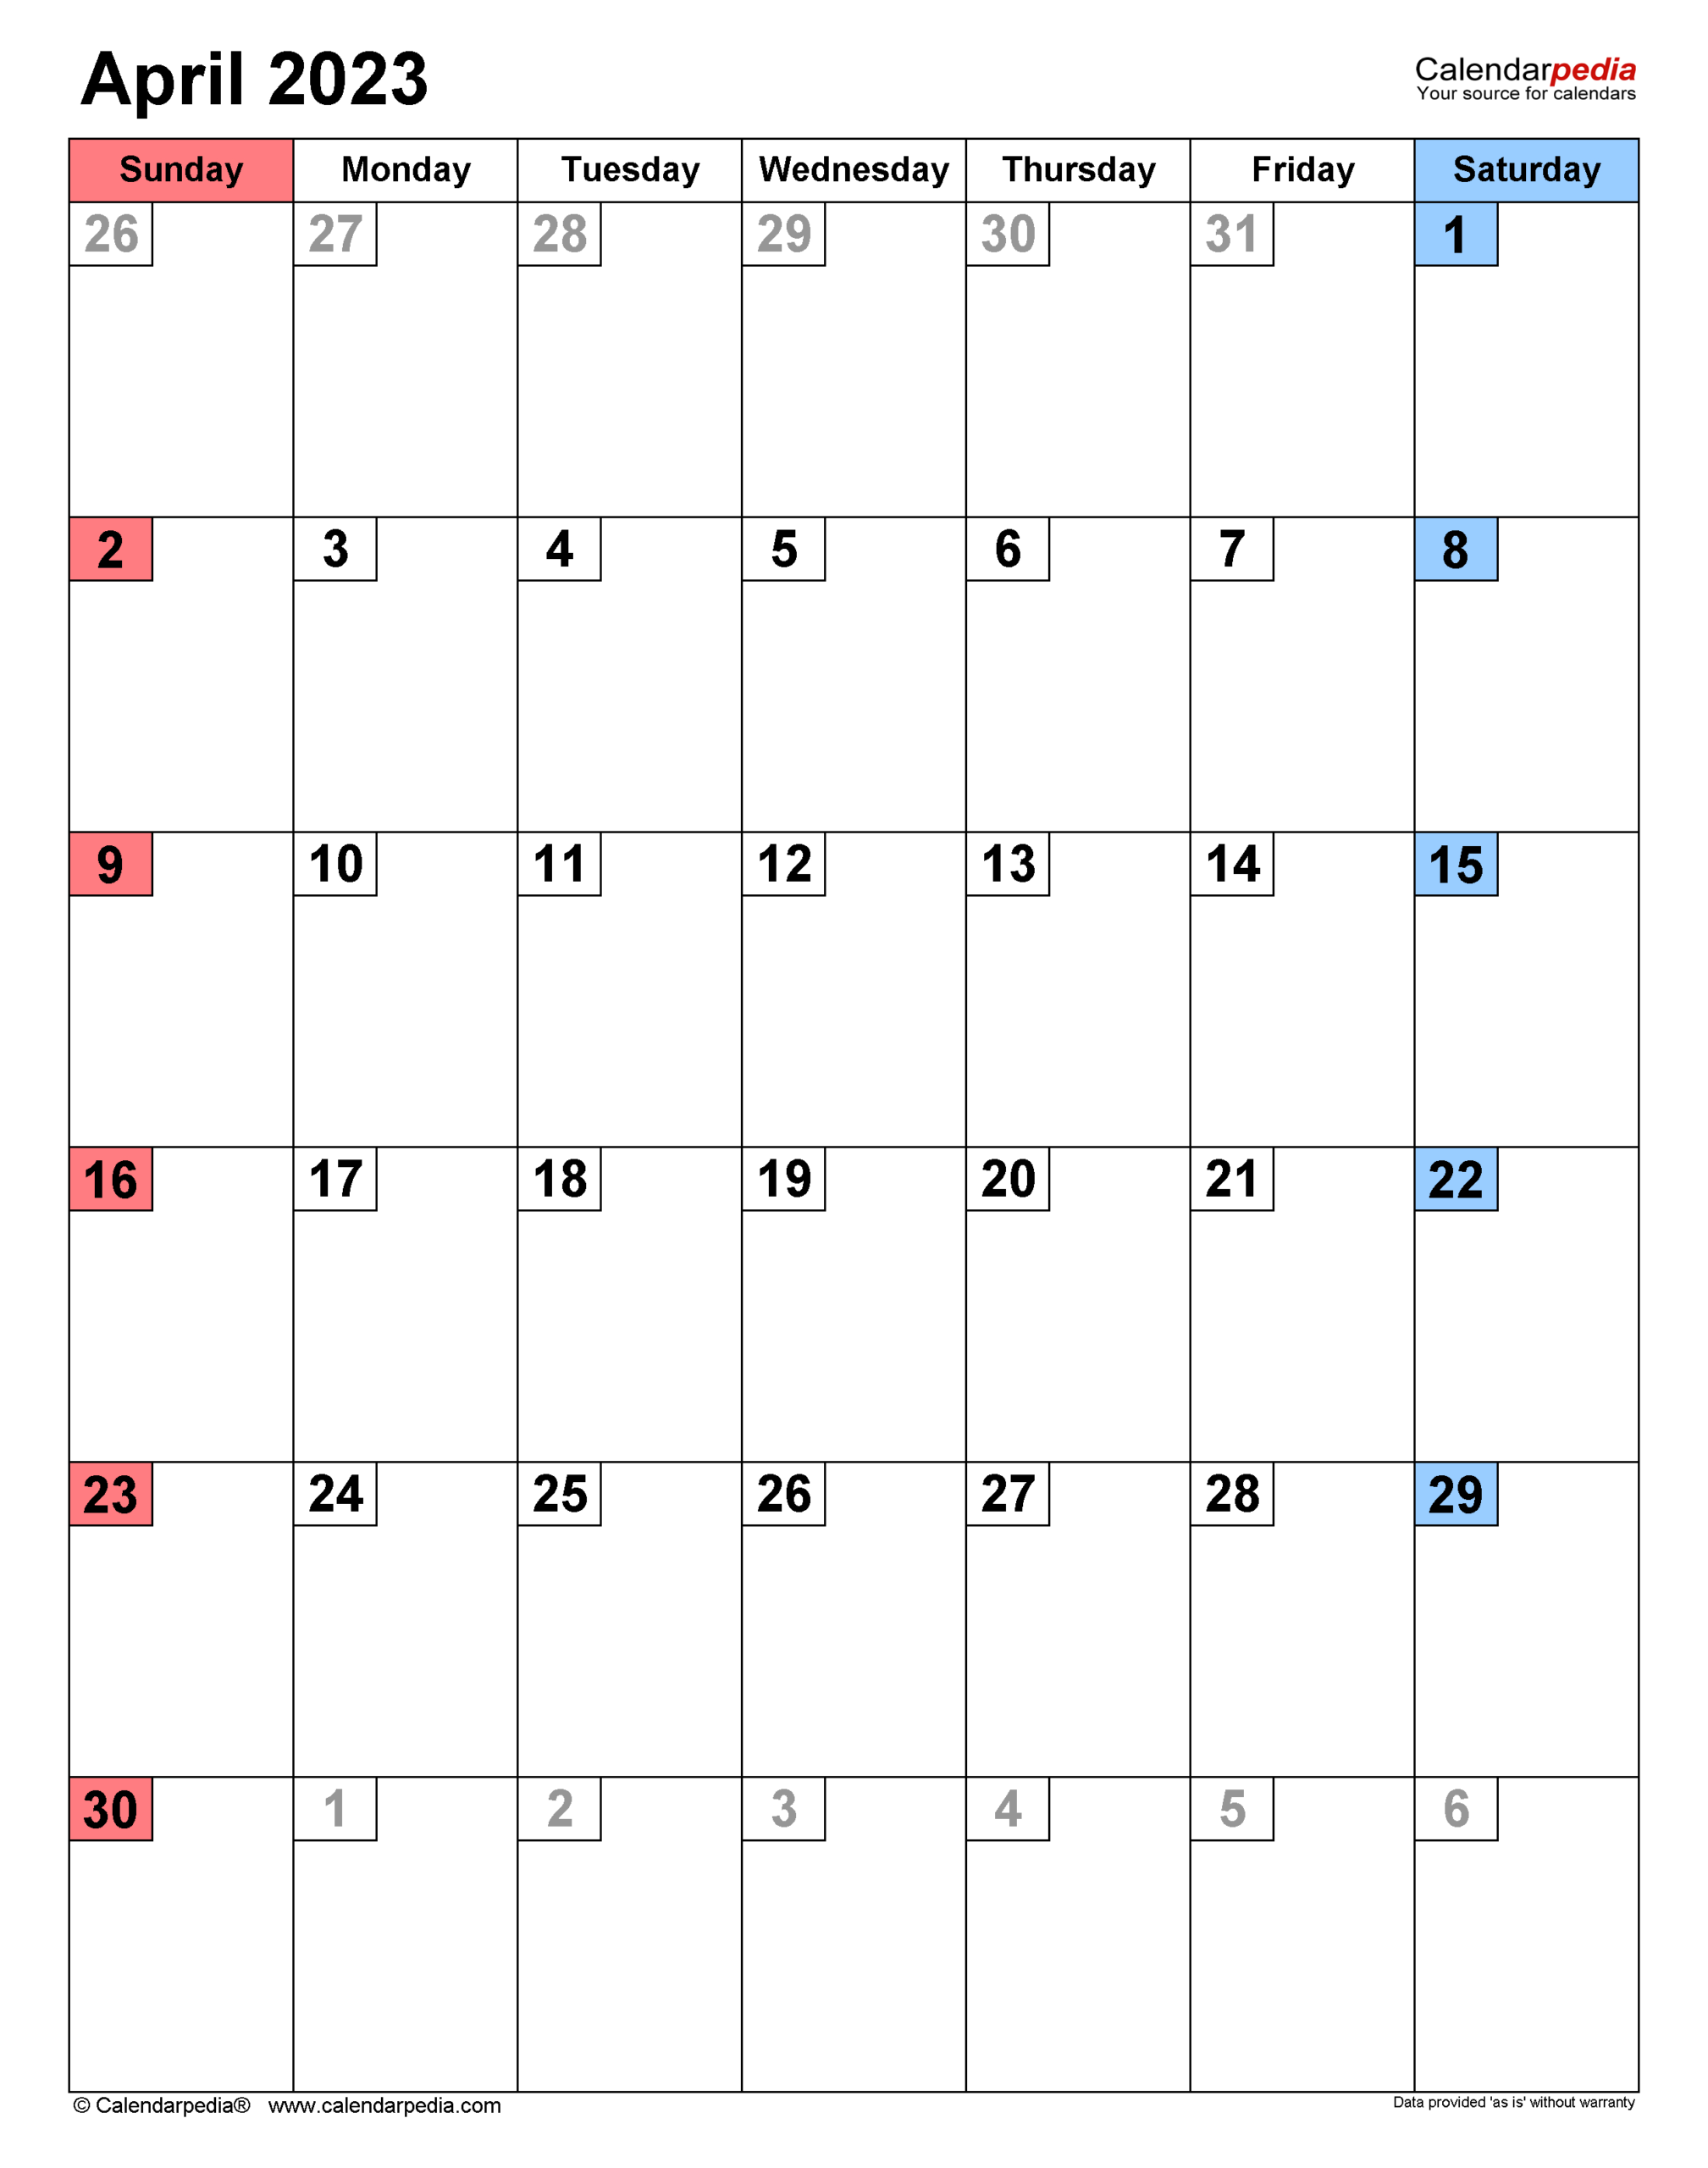 April 2023 Calendar | Templates For Word, Excel And Pdf pertaining to Free Vertical Printable Calendars For April 2023 Calendar Holiday Usa 2023